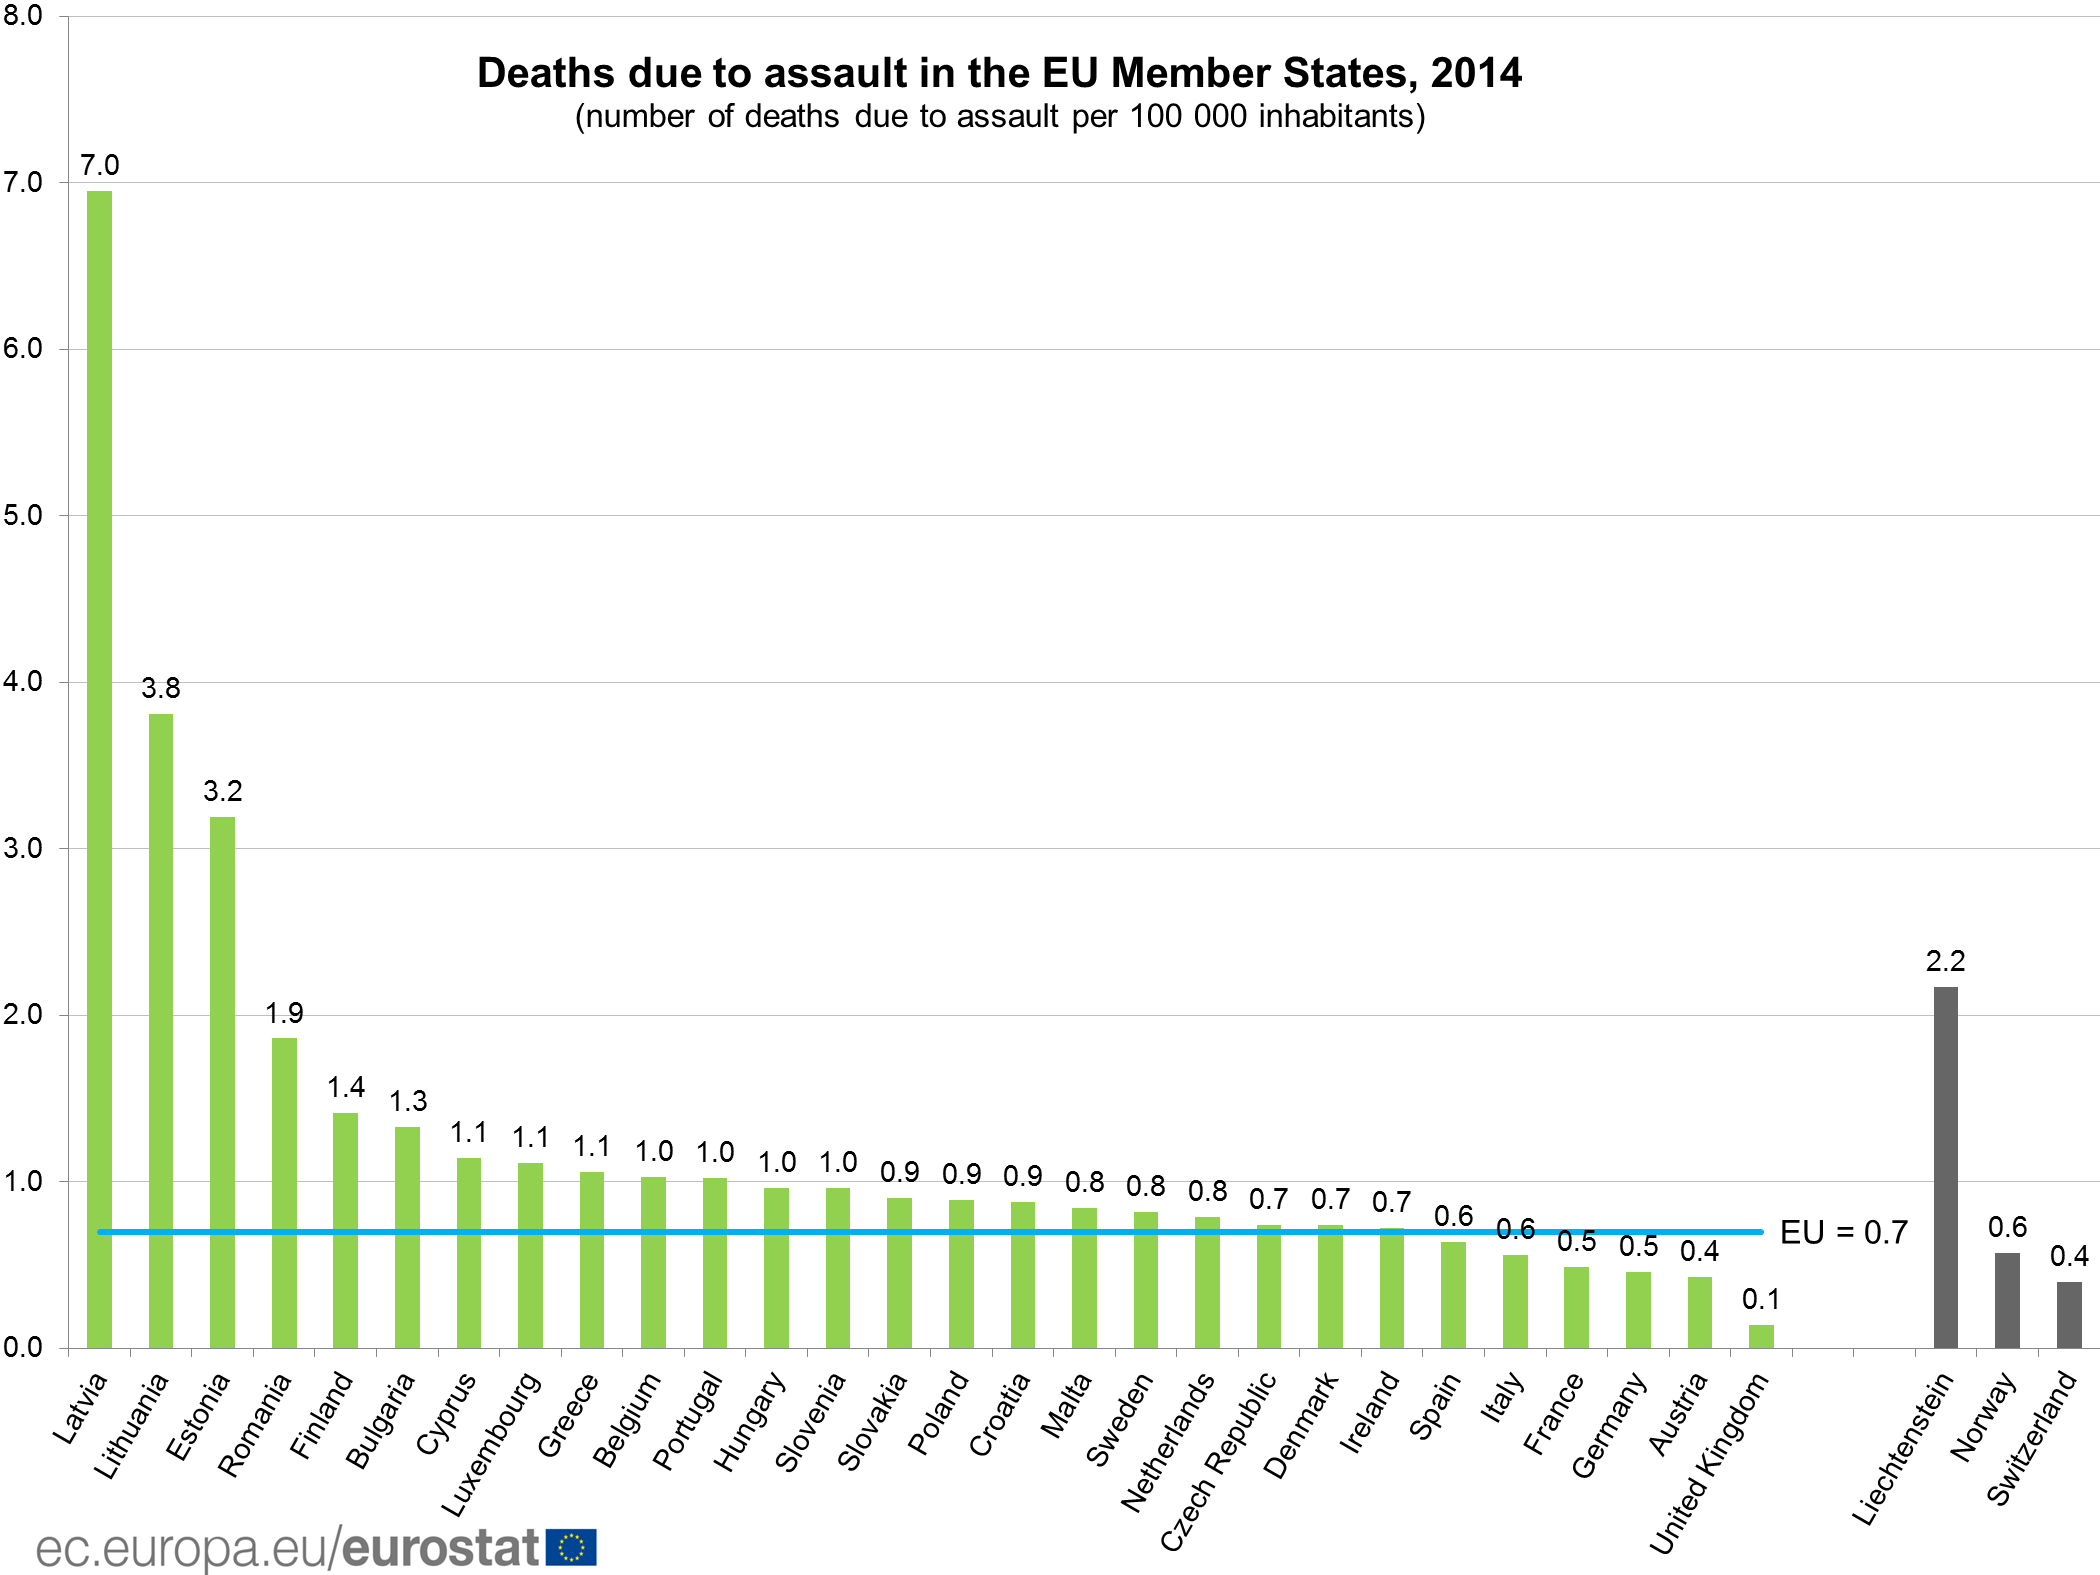 Deaths due to assault in the EU, 2014